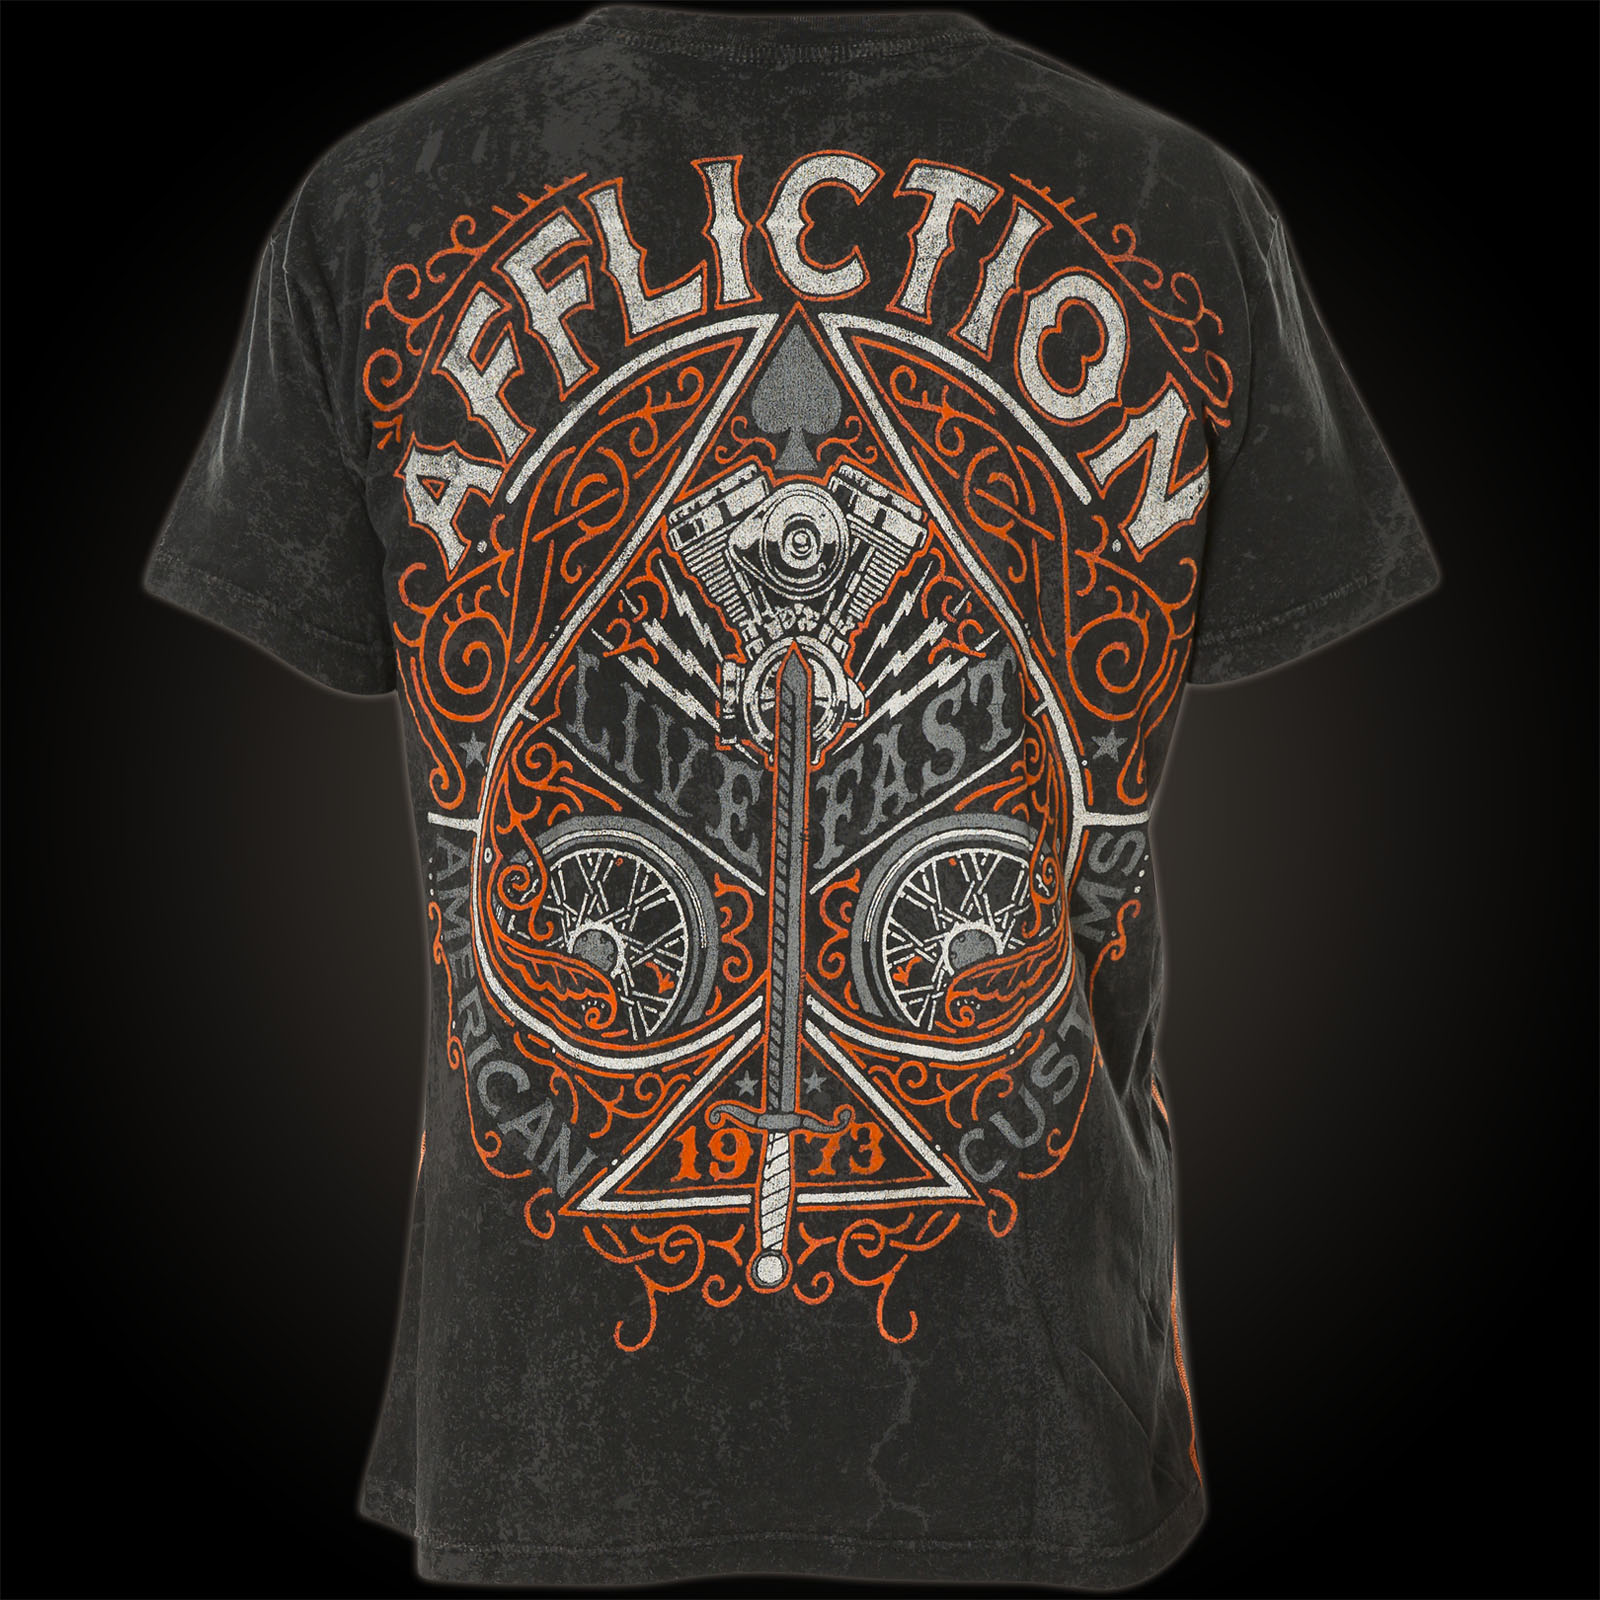 Affliction V Spade T-shirt with a decorated spade and sword